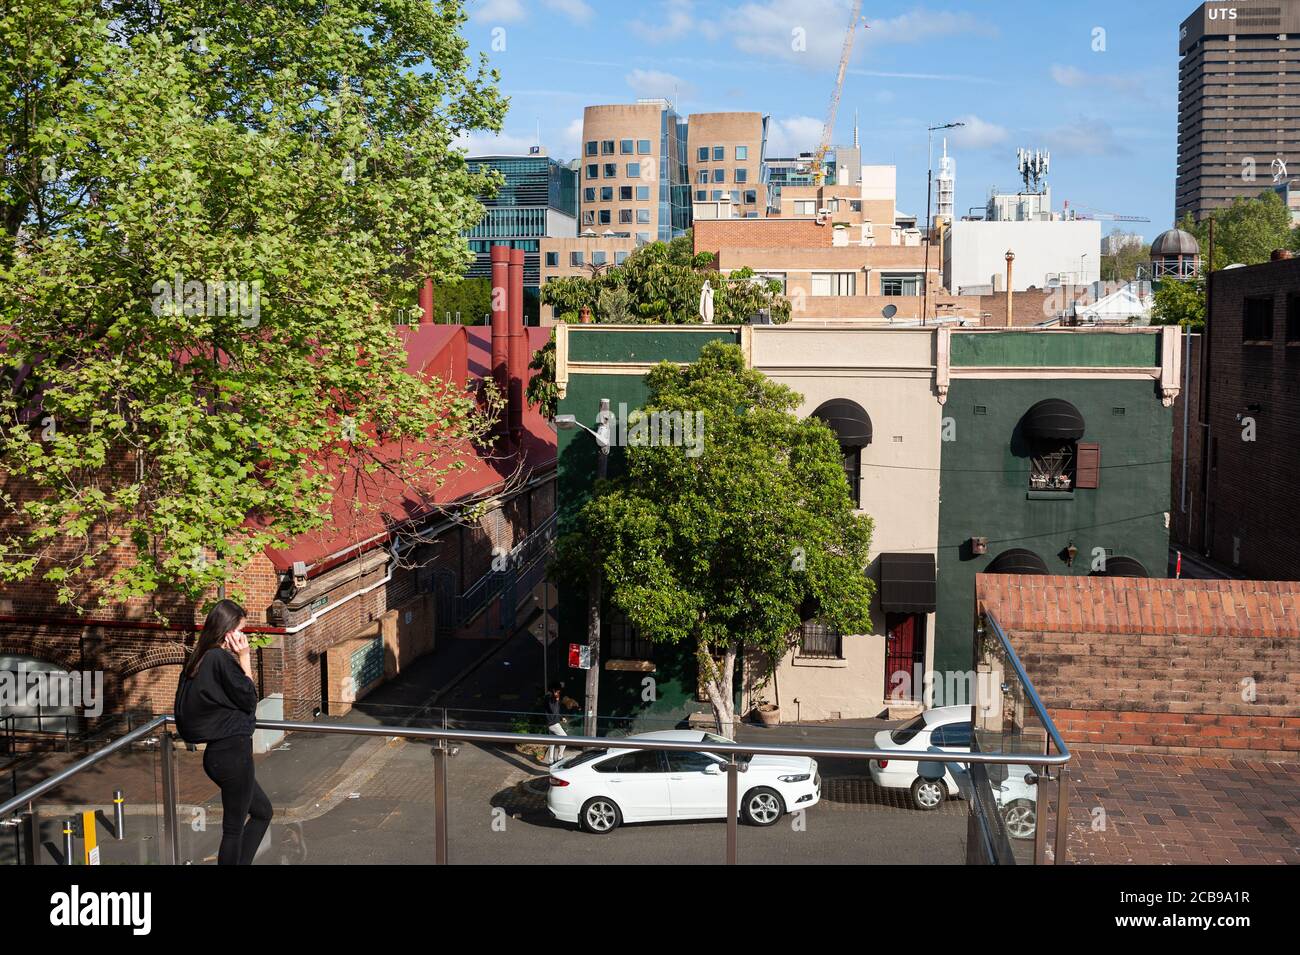 26.09.2019, Sydney, New South Wales, Australia - A young woman talks on the phone with the cityscape of the Haymarket suburb in the backdrop. Stock Photo